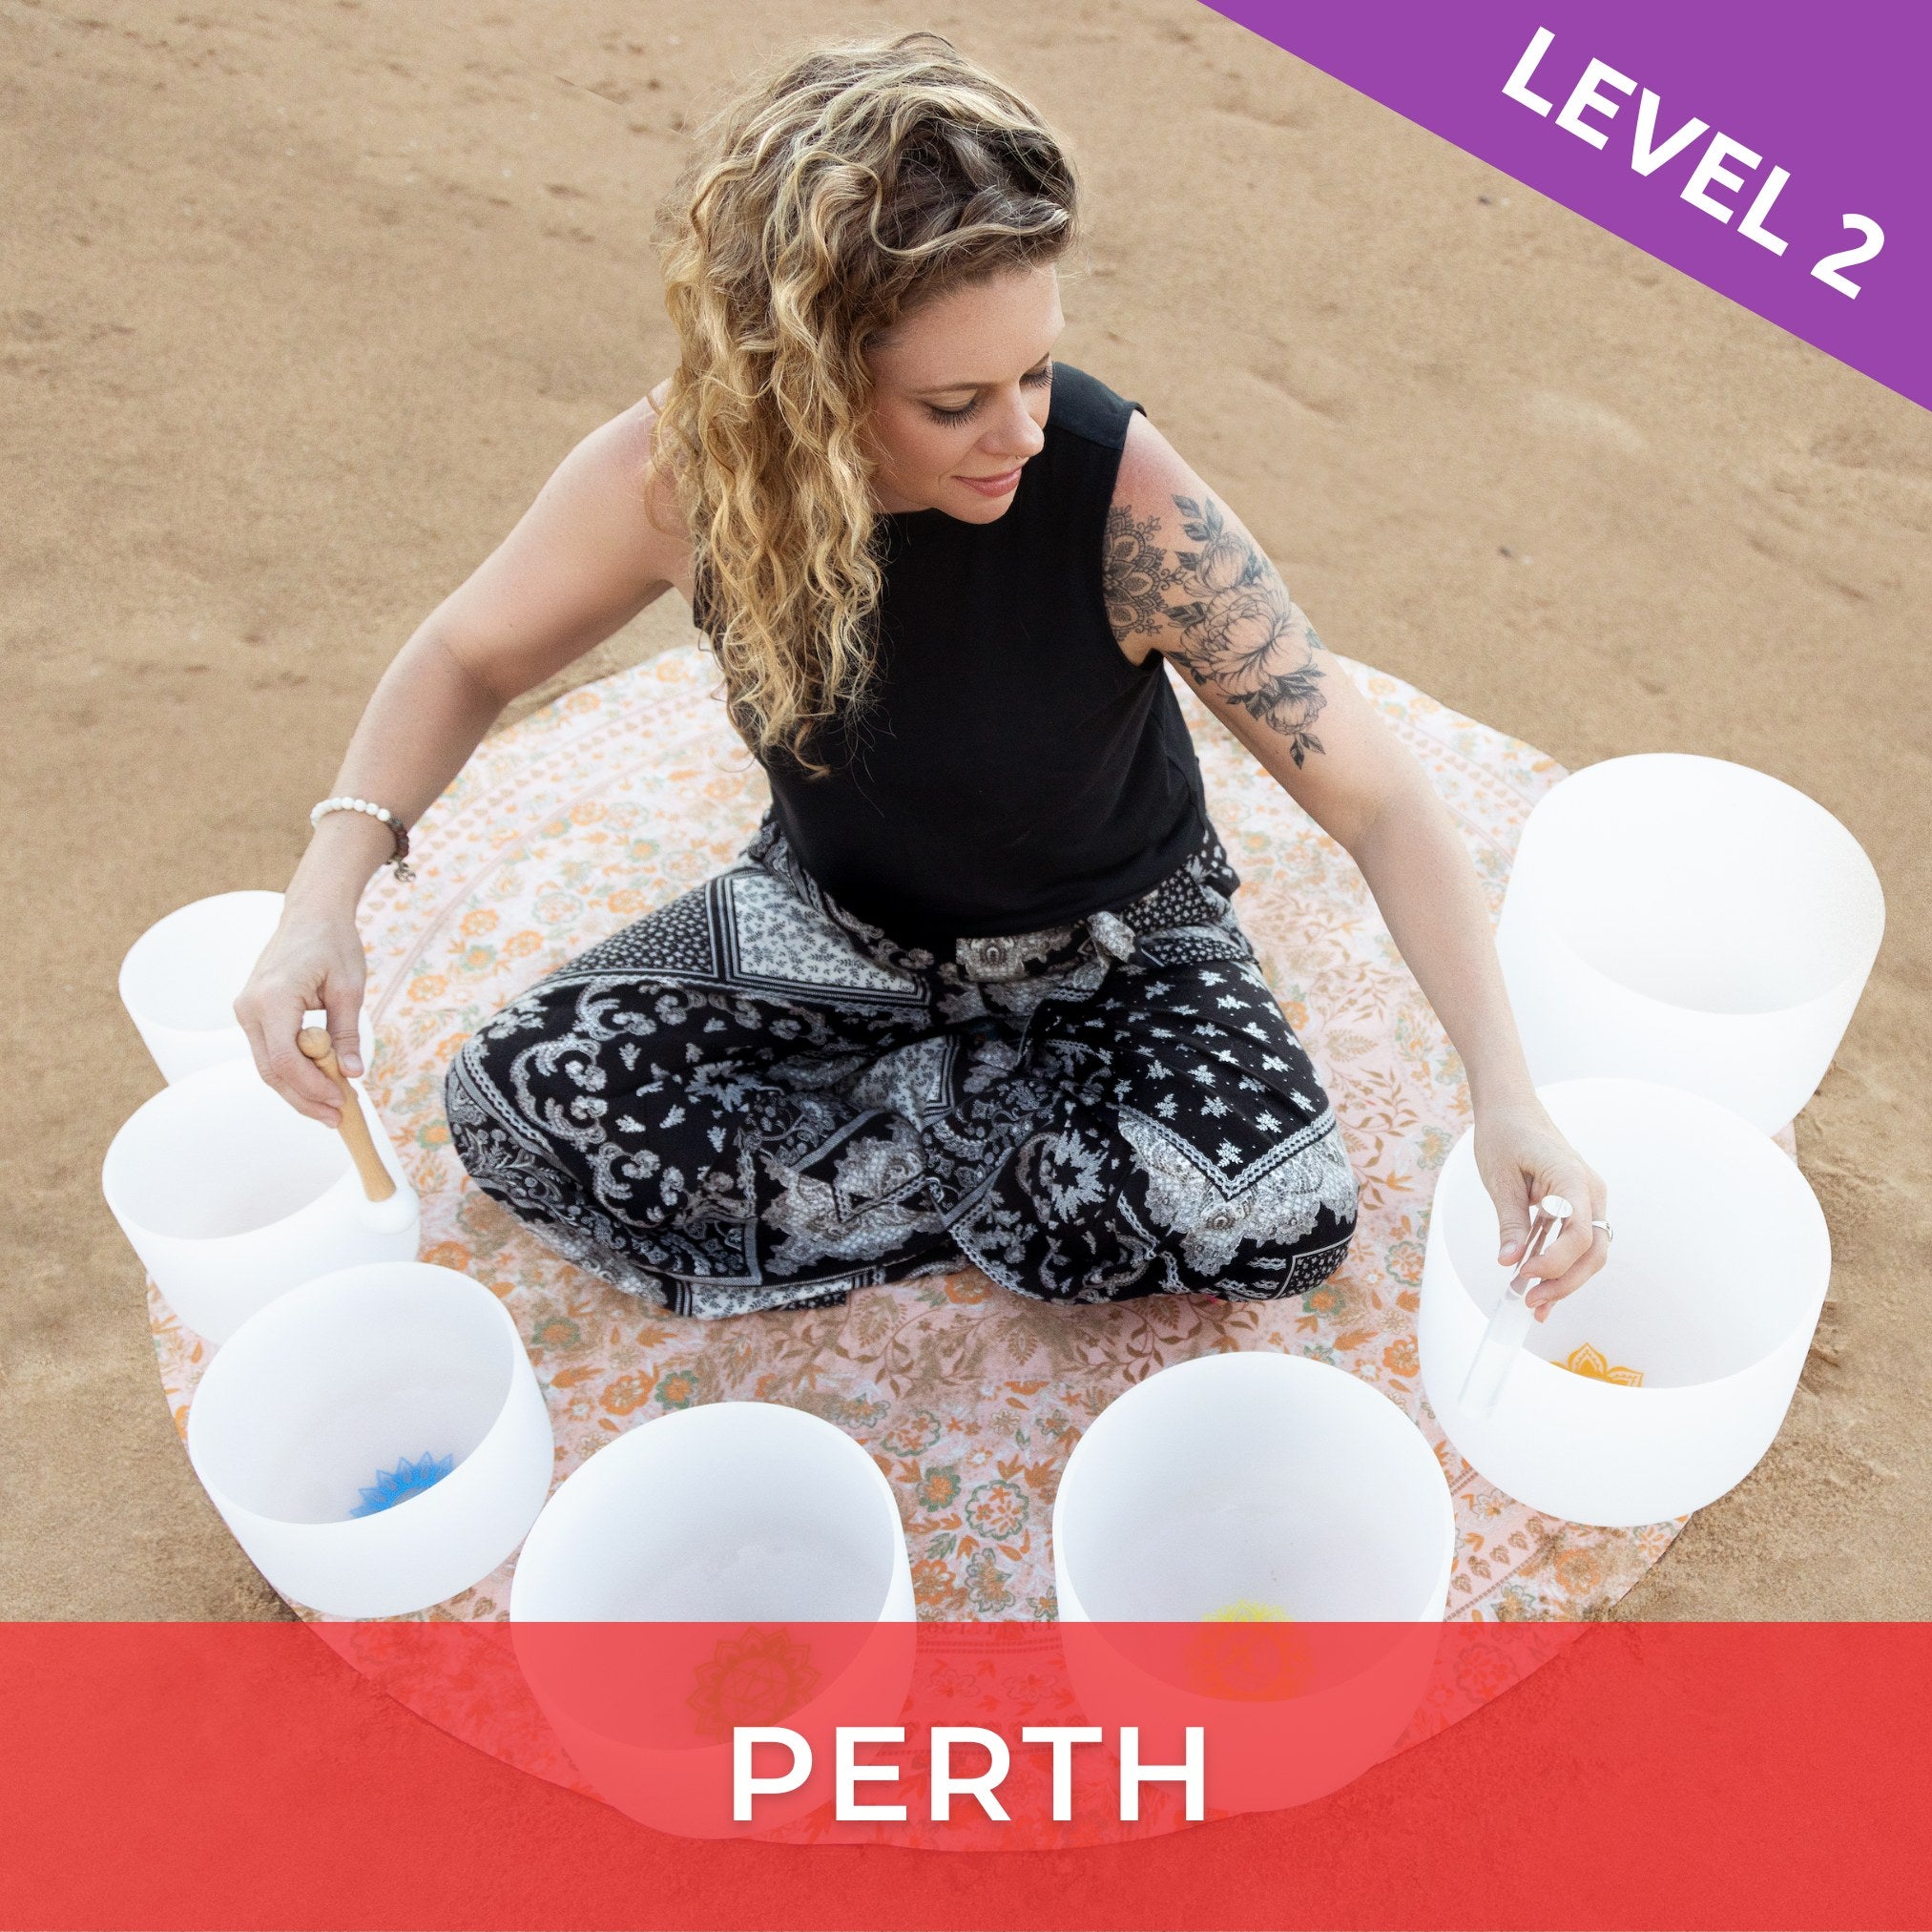 Crystal Singing Bowl Workshop Perth for Yoga Teachers and Practitioners